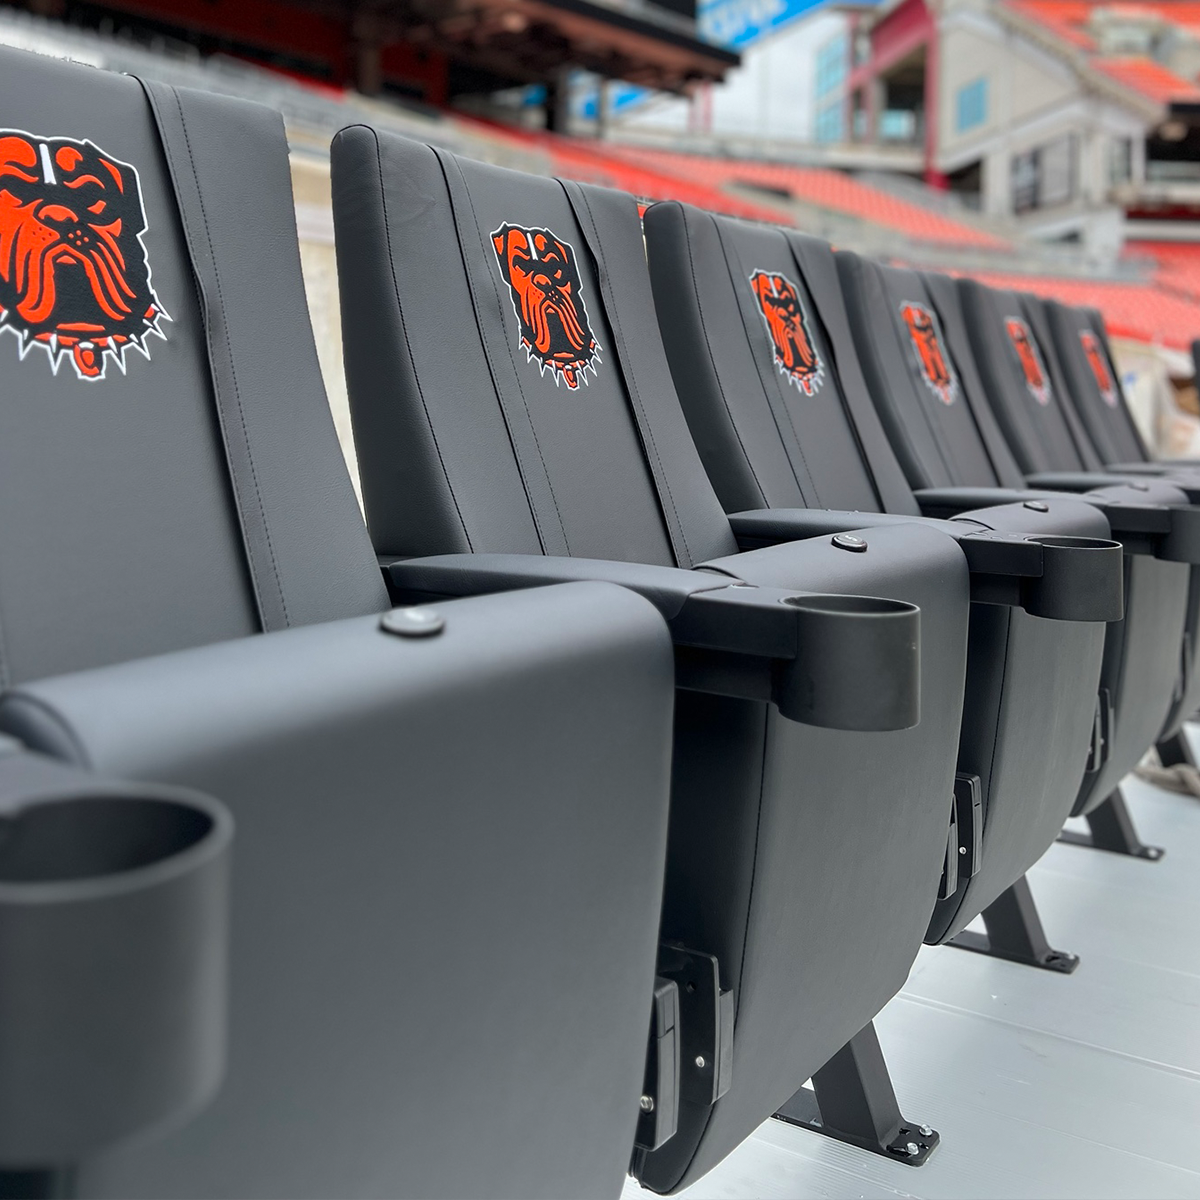 SuiteMax 3.5 VIP Seats with Seattle Mariners Secondary Logo